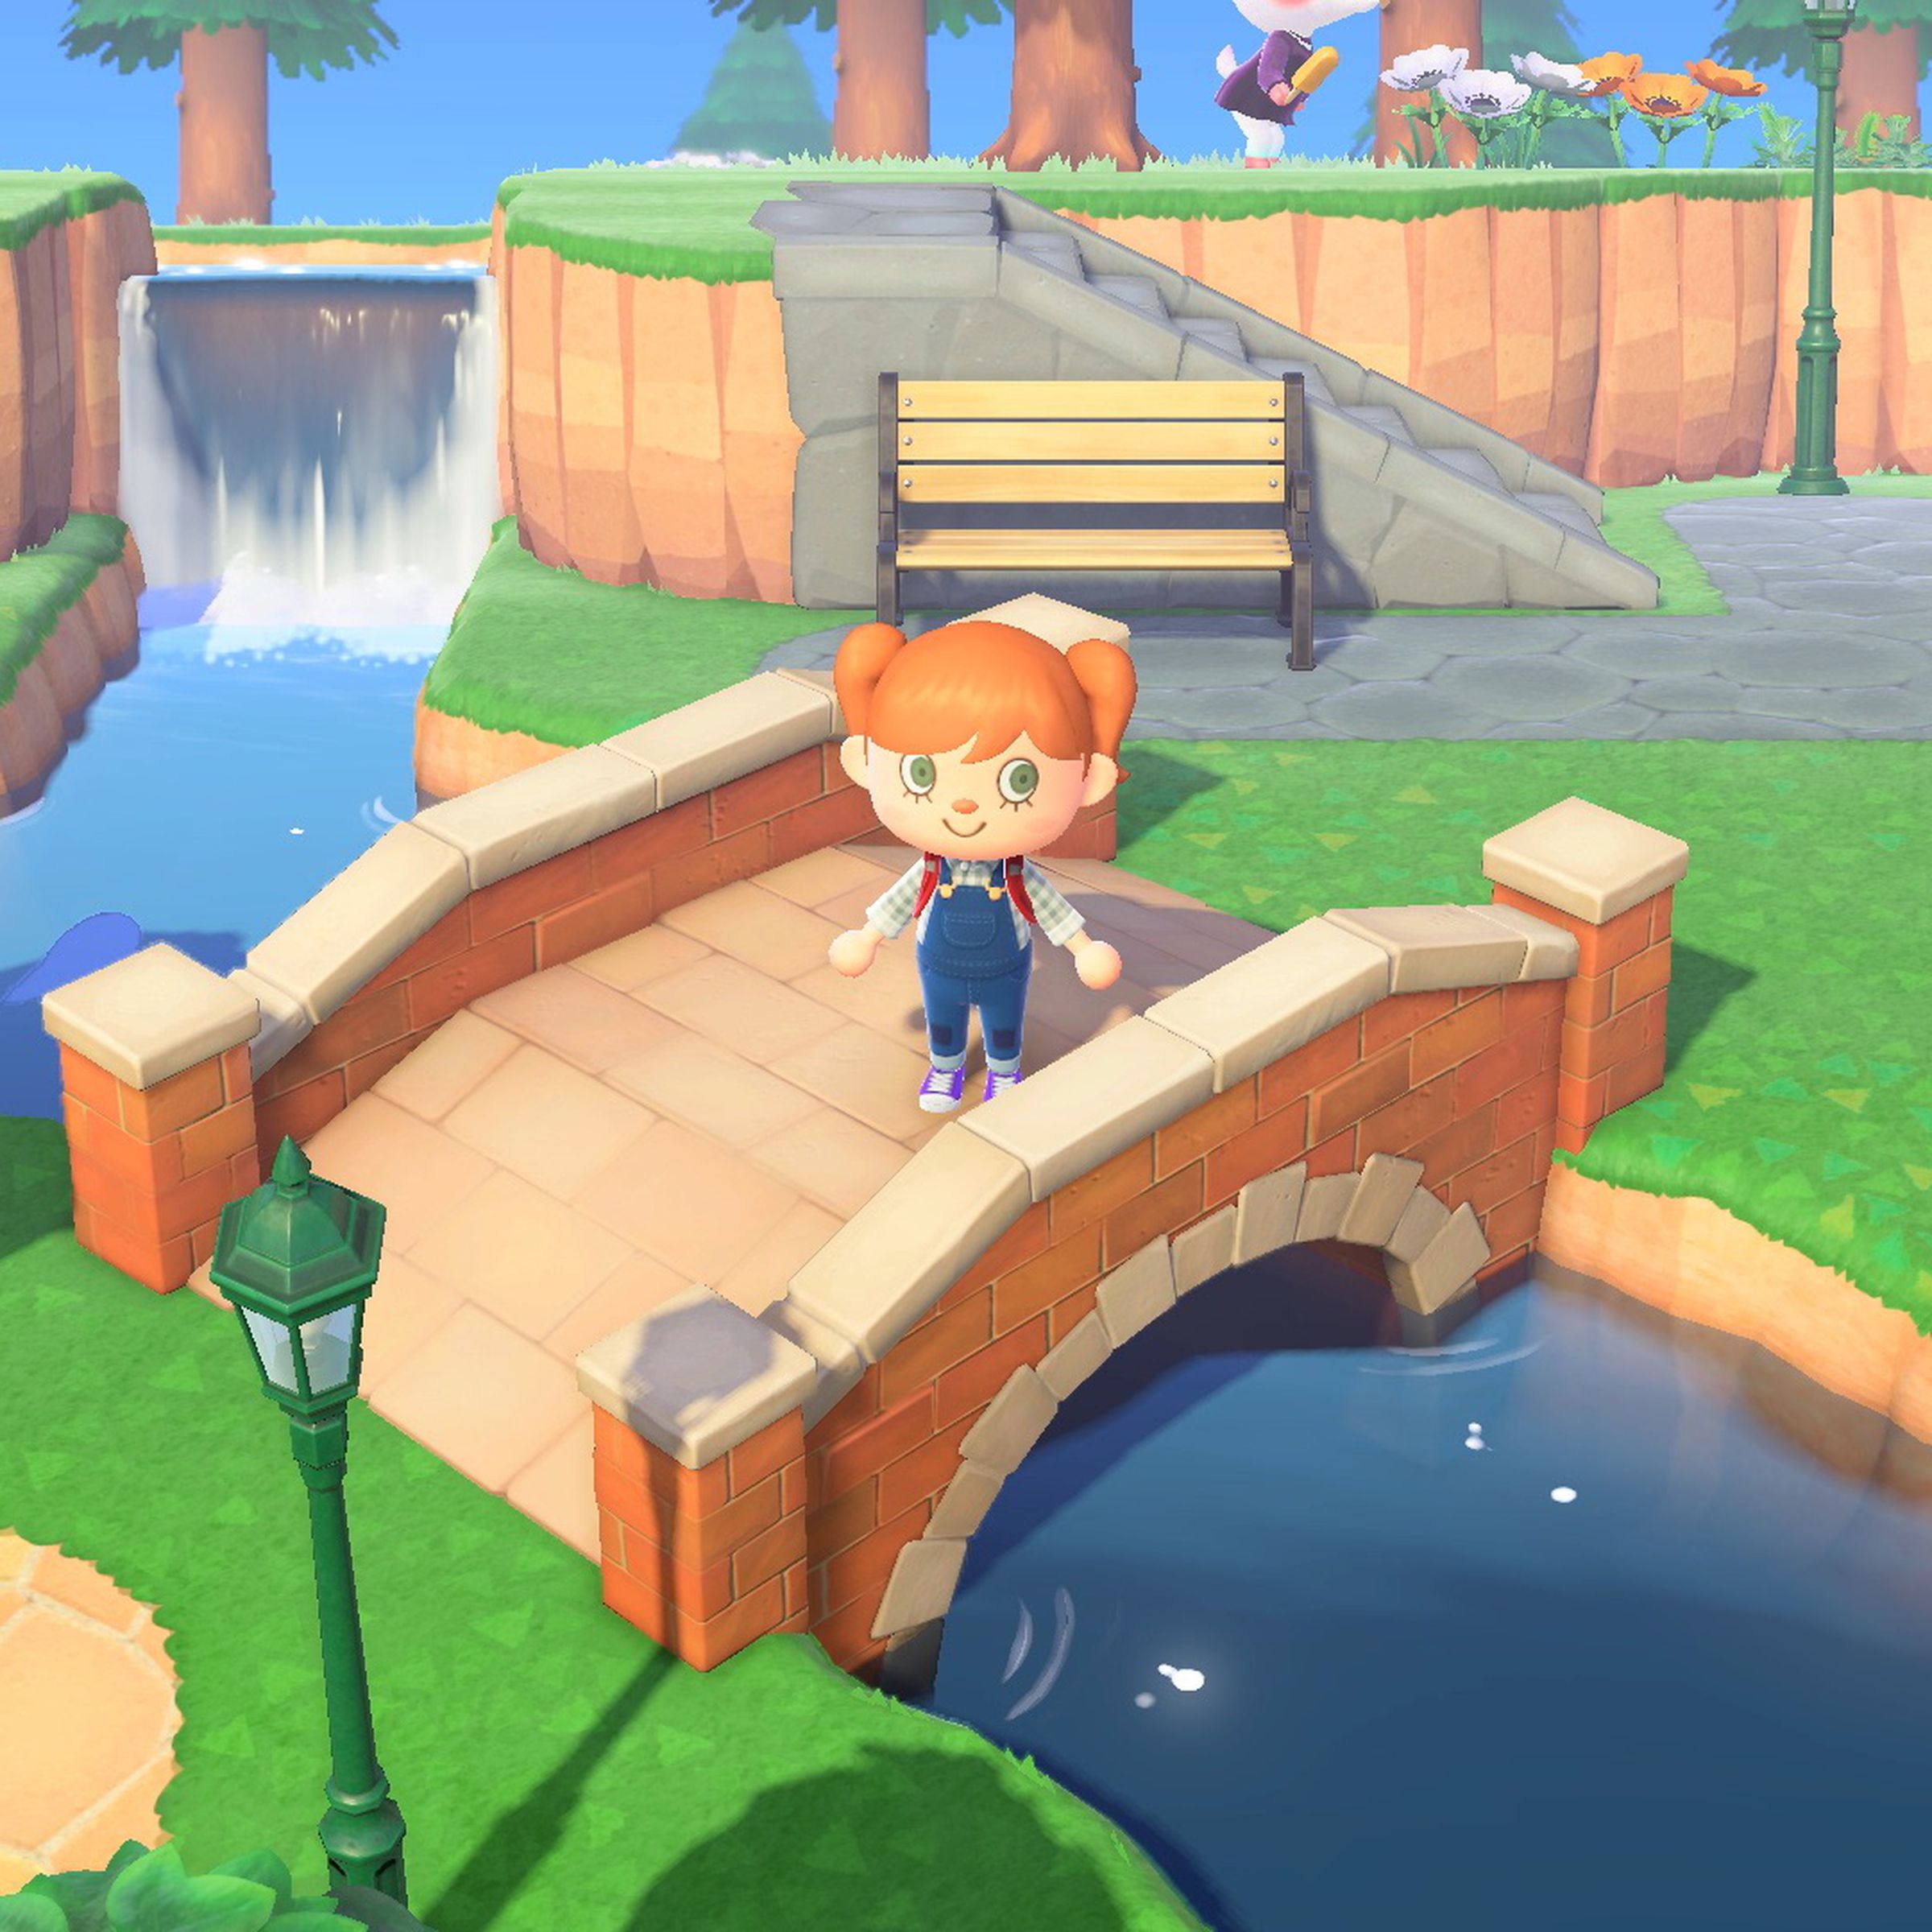 A still image from the video game Animal Crossing: New Horizons